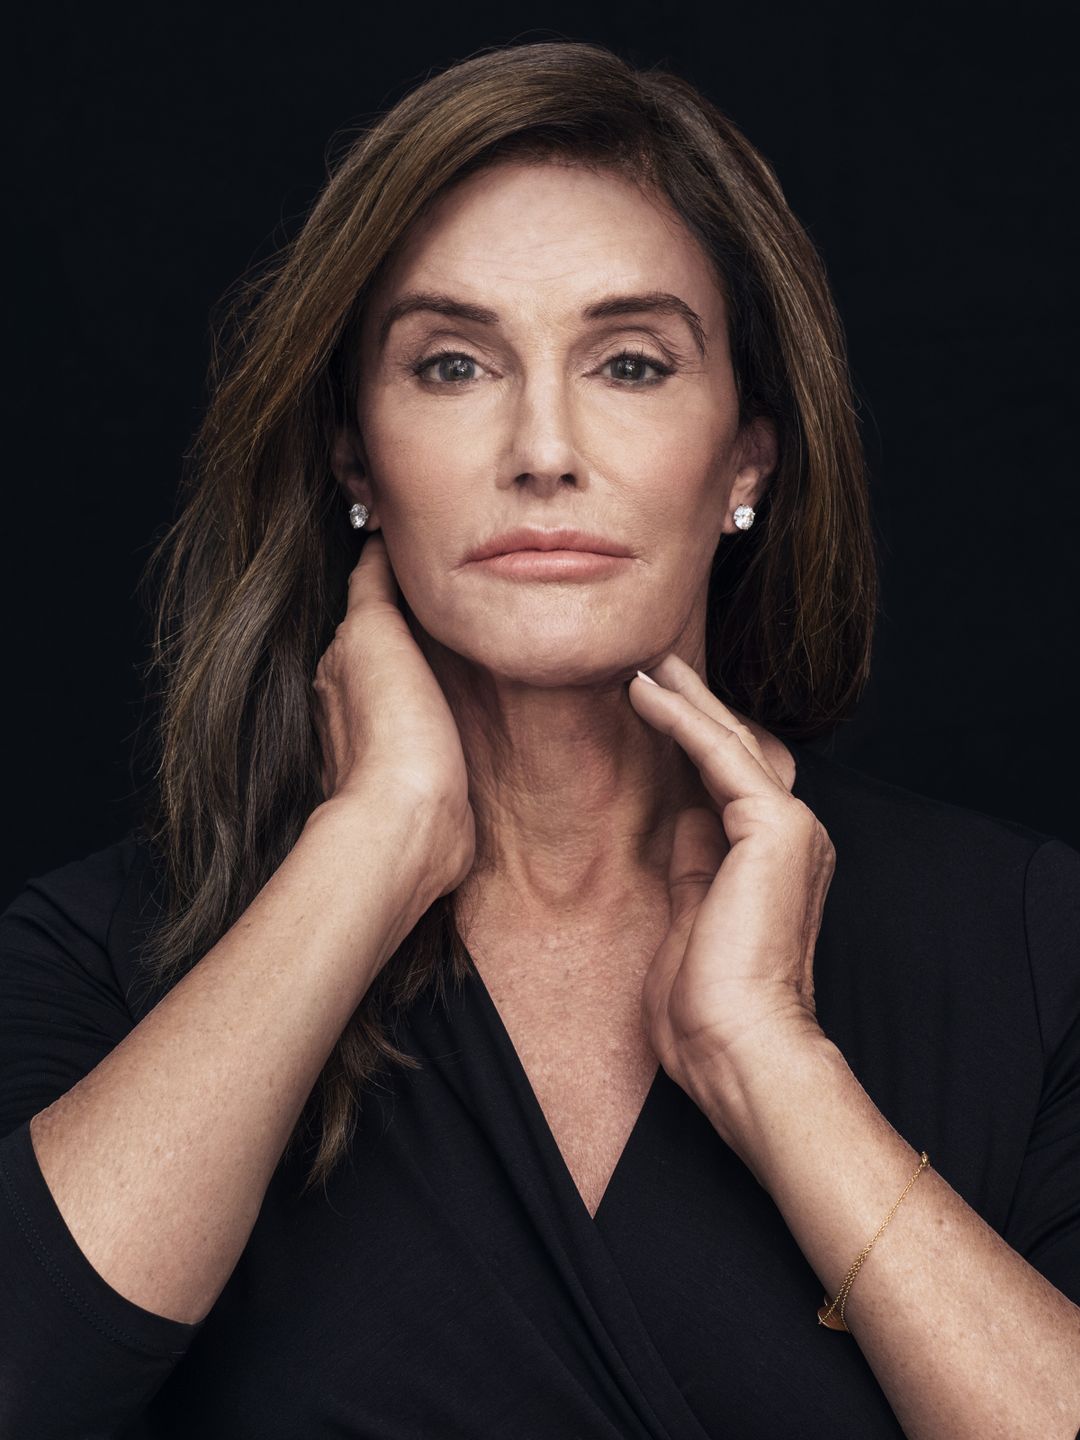 Caitlyn Jenner who is her father